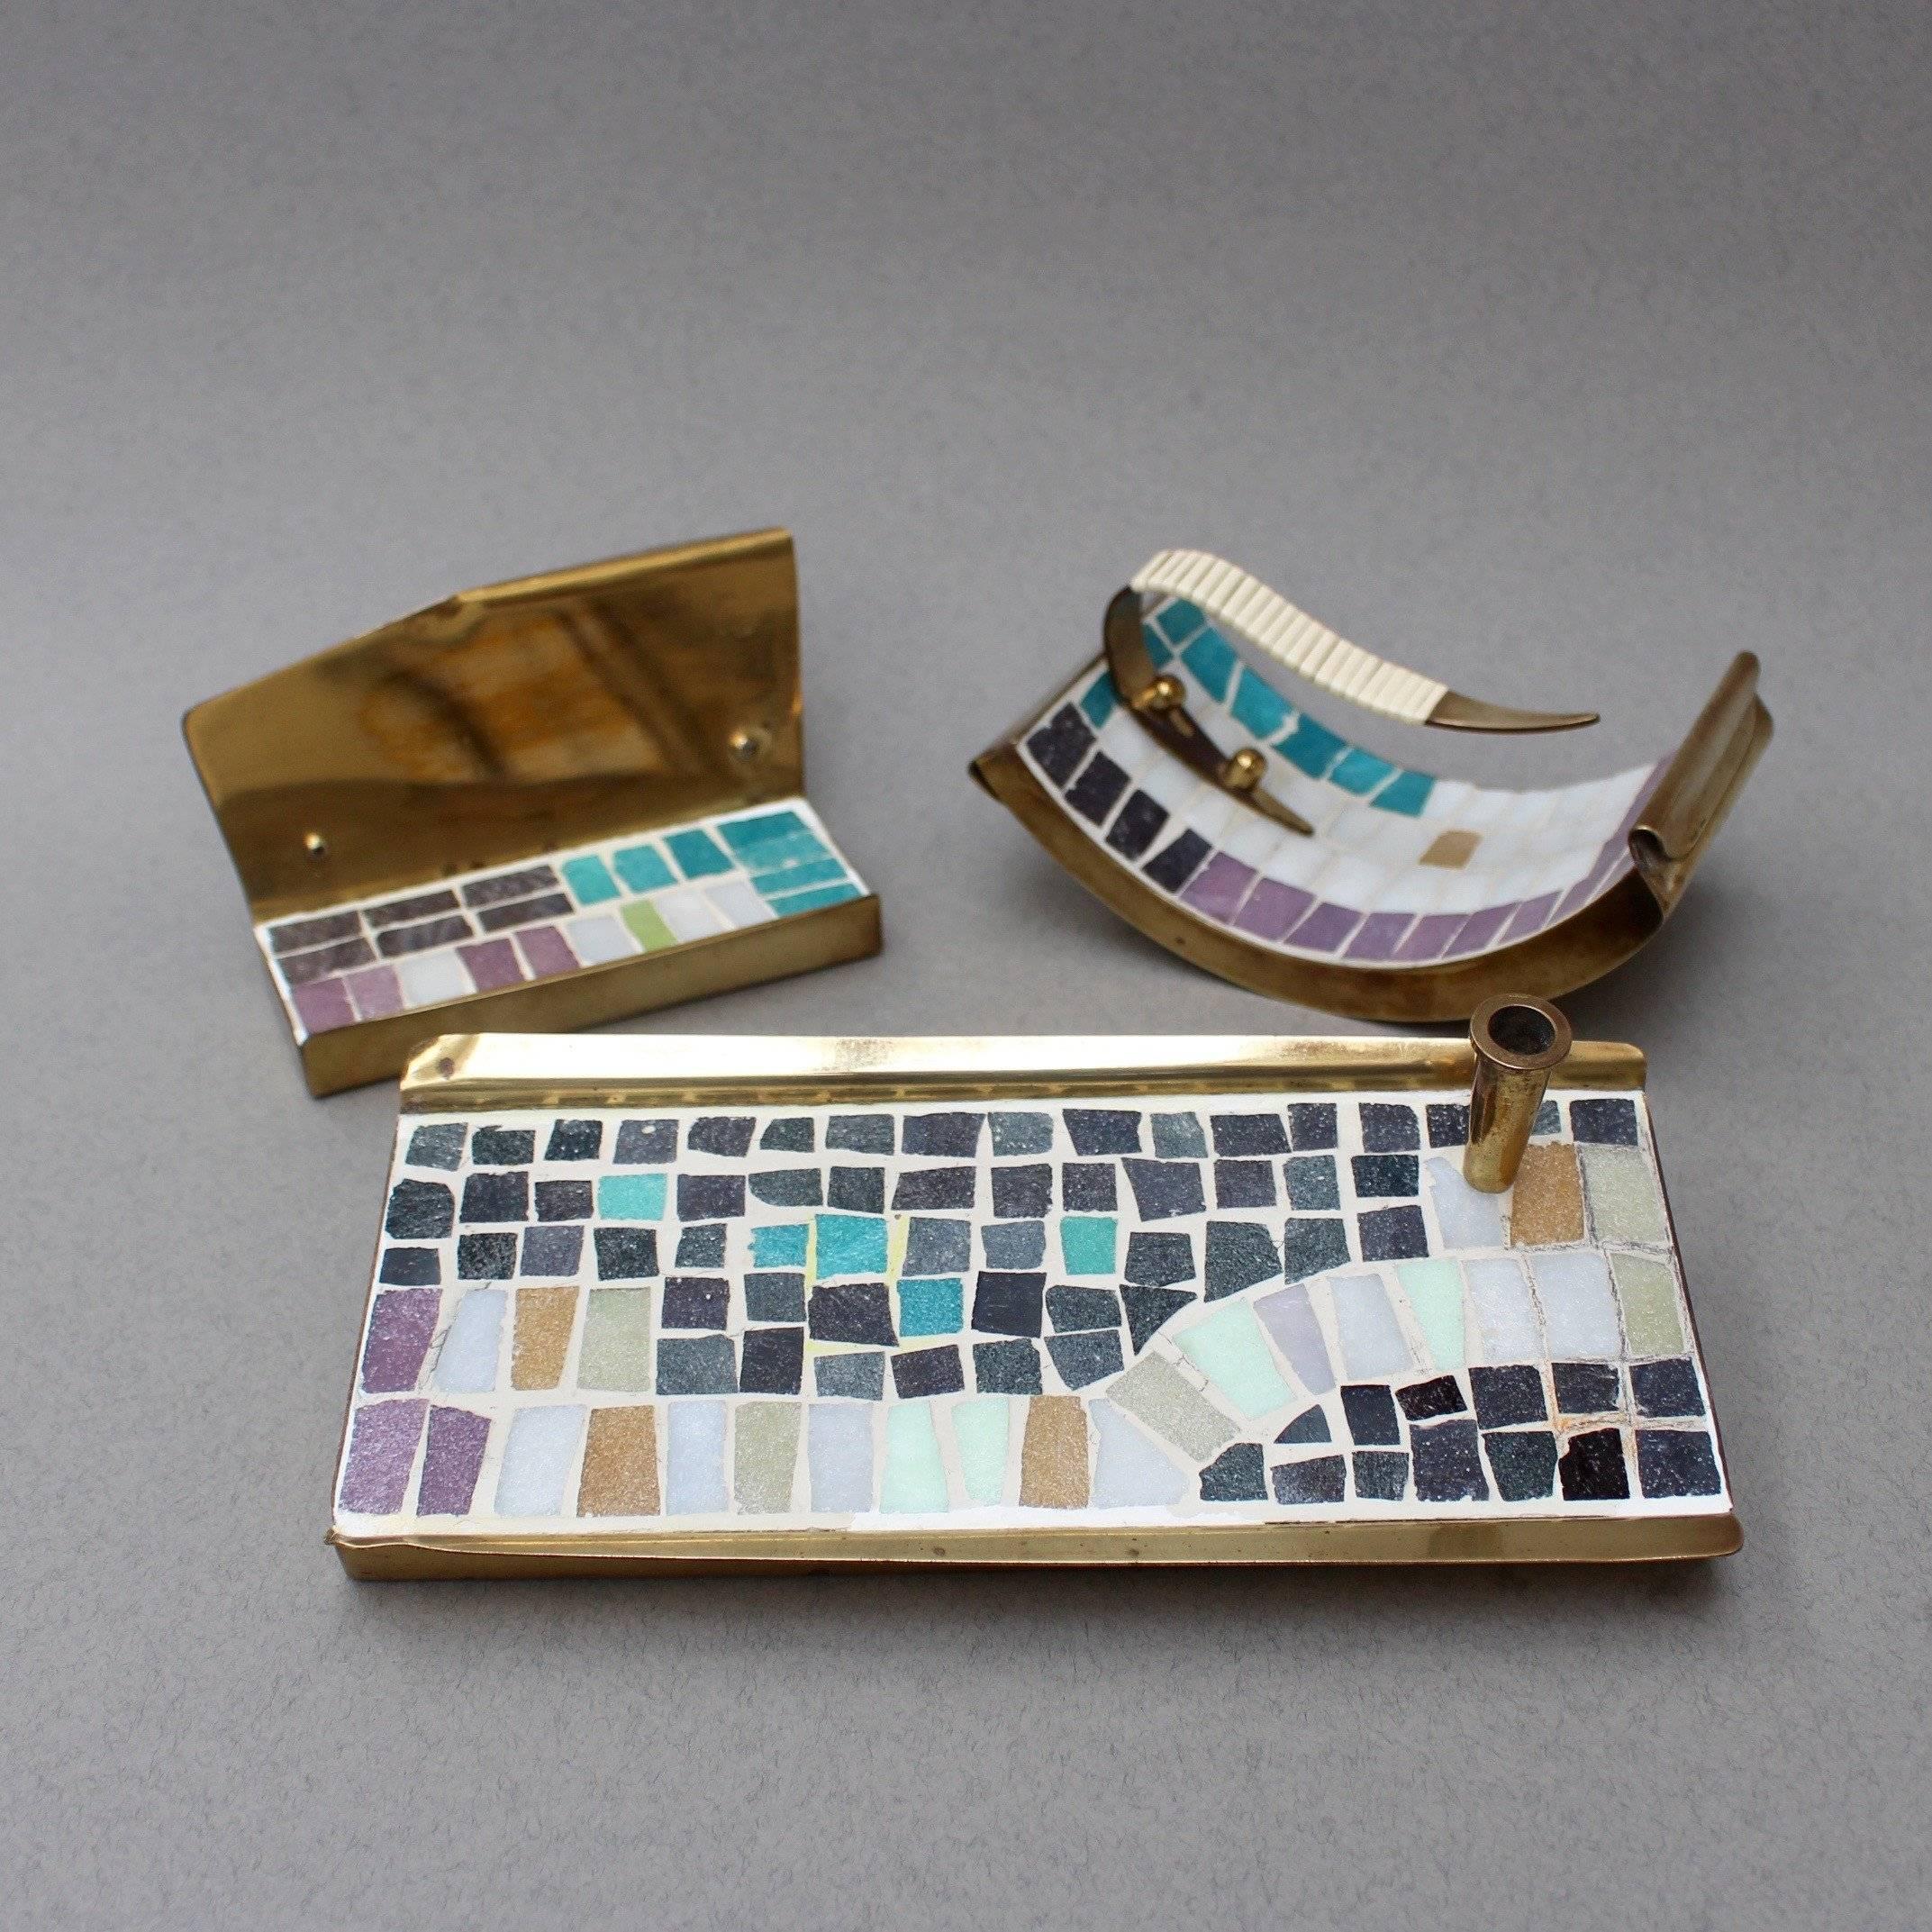 Midcentury brass and mosaic tile desk accessories set, circa 1960s. The set consists of a sizeable and weighty pen holder, a business card rest and a one-of-a-kind rocker blotter. This ensemble is so perfectly 'Mad Men' elegant and of the period and